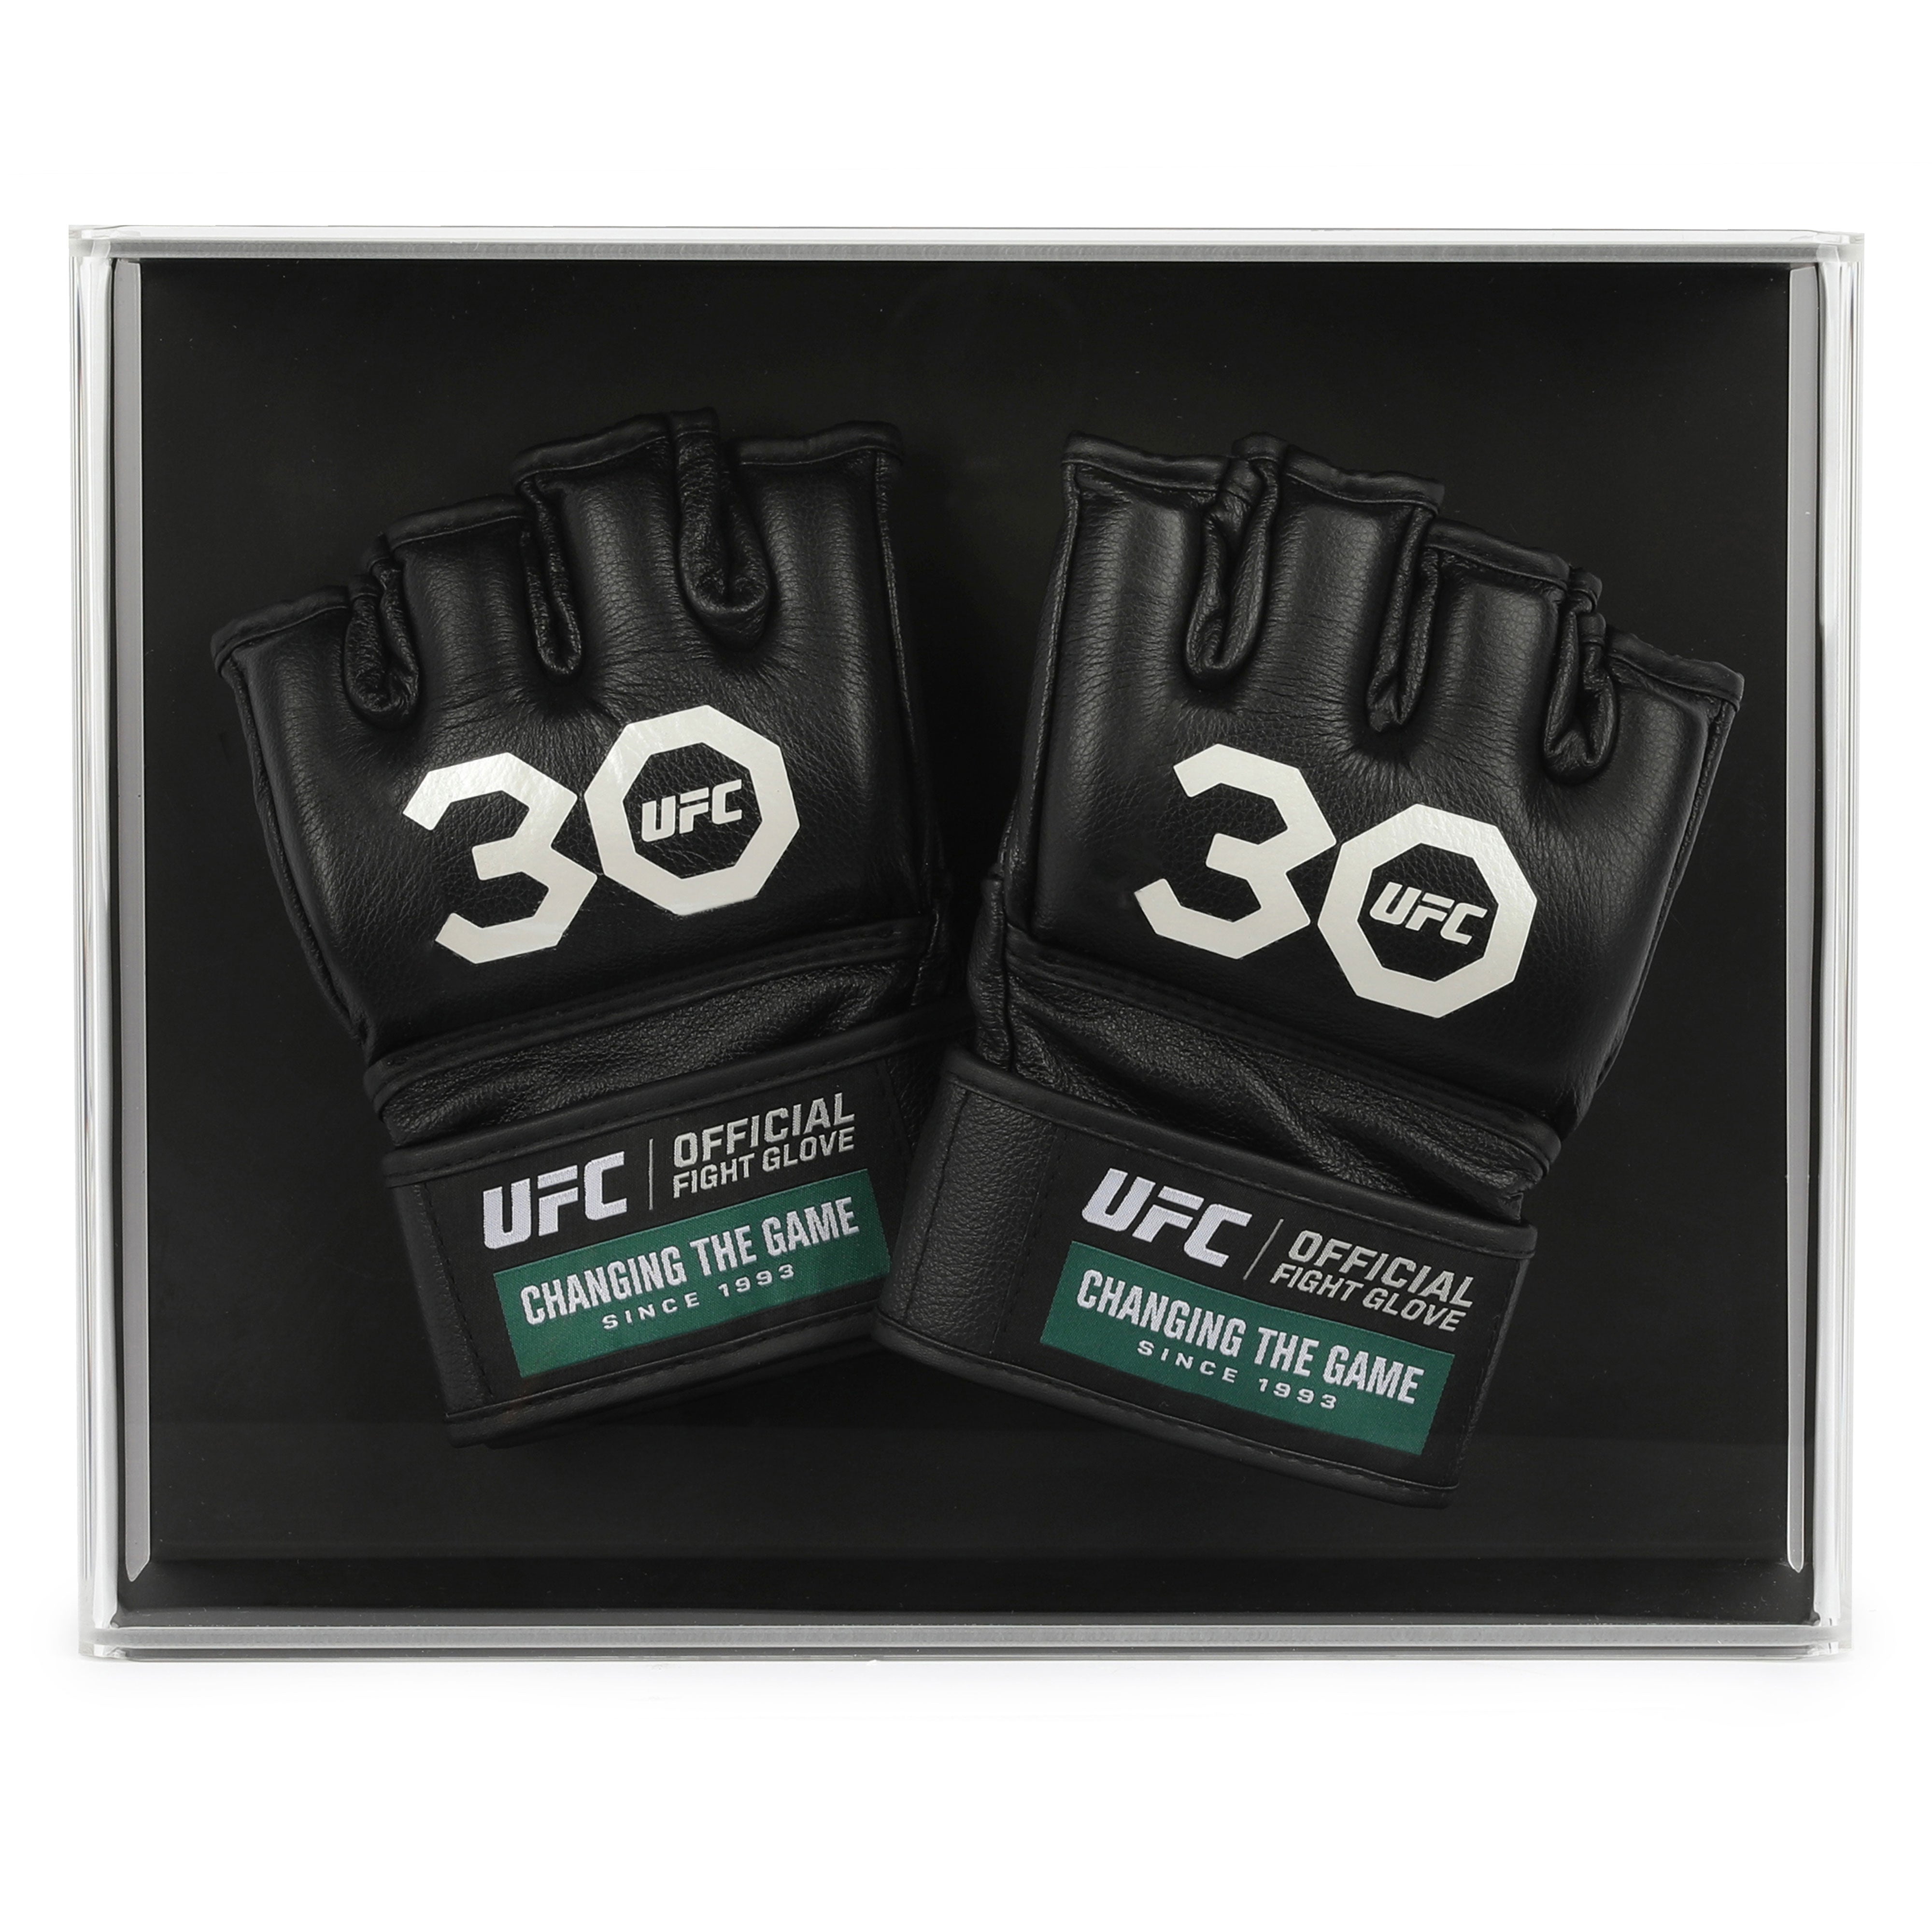 Dustin Poirier Signed Official UFC Gloves – 30th Anniversary Edition